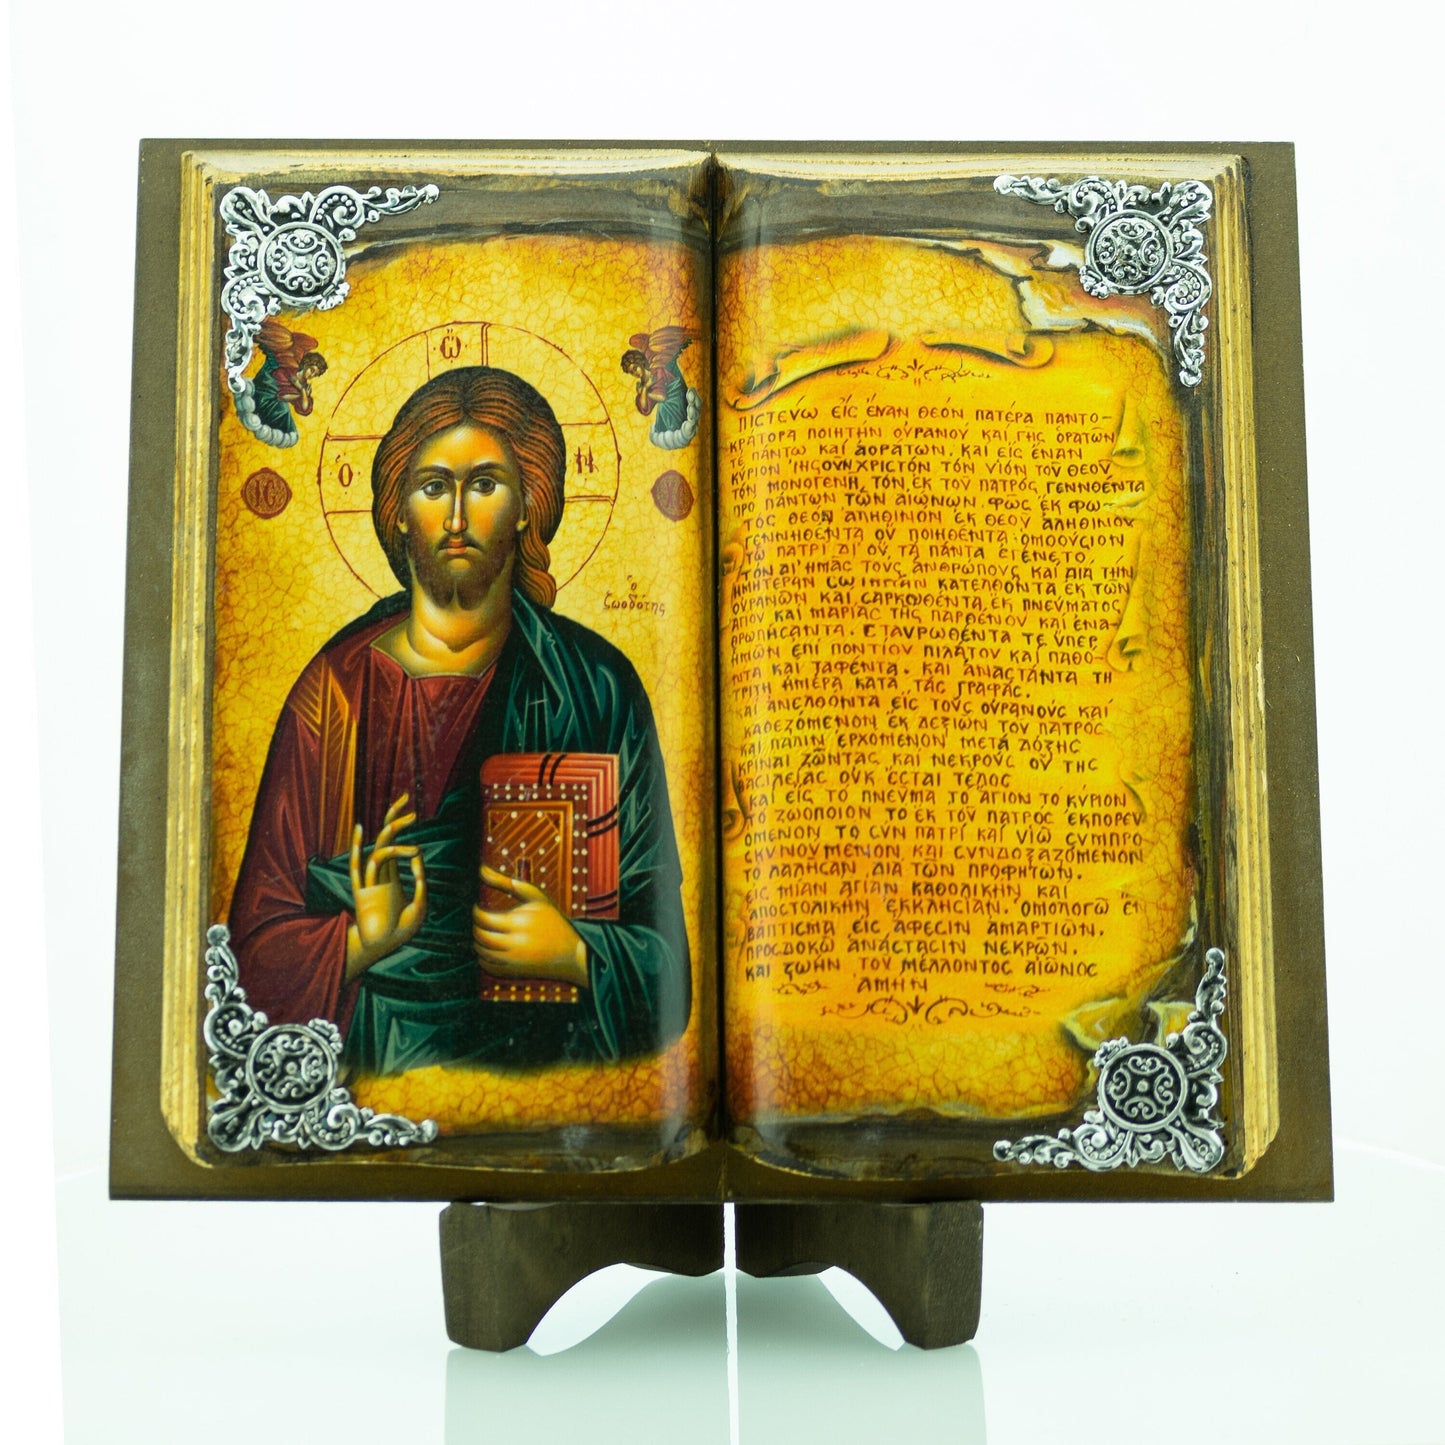 Jesus Christ icon Pantocrator, Handmade Greek Orthodox icon of our Lord, Byzantine art wall hanging wood plaque 30x31cm, religious gift TheHolyArt